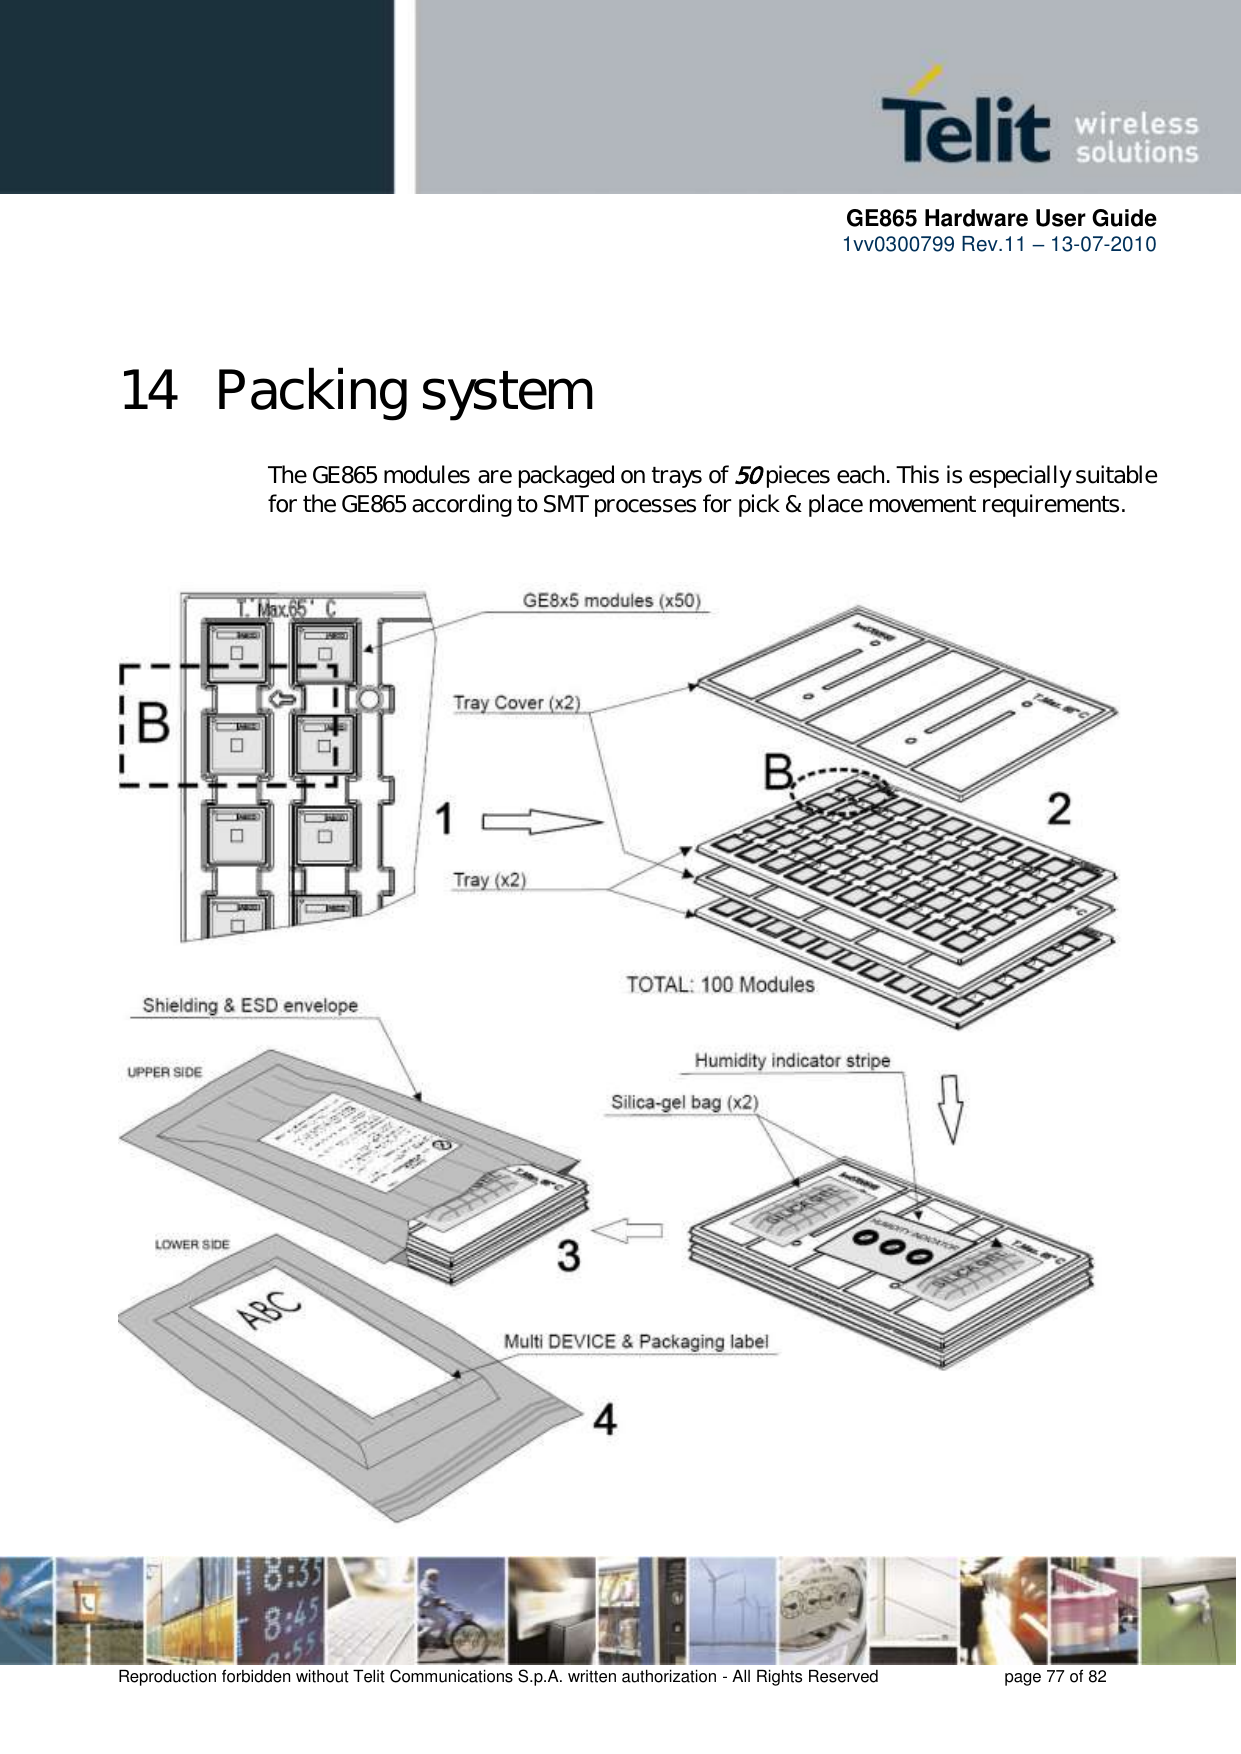      GE865 Hardware User Guide 1vv0300799 Rev.11 – 13-07-2010       Reproduction forbidden without Telit Communications S.p.A. written authorization - All Rights Reserved    page 77 of 82  14  Packing system  The GE865 modules are packaged on trays of 50 pieces each. This is especially suitable for the GE865 according to SMT processes for pick &amp; place movement requirements.    